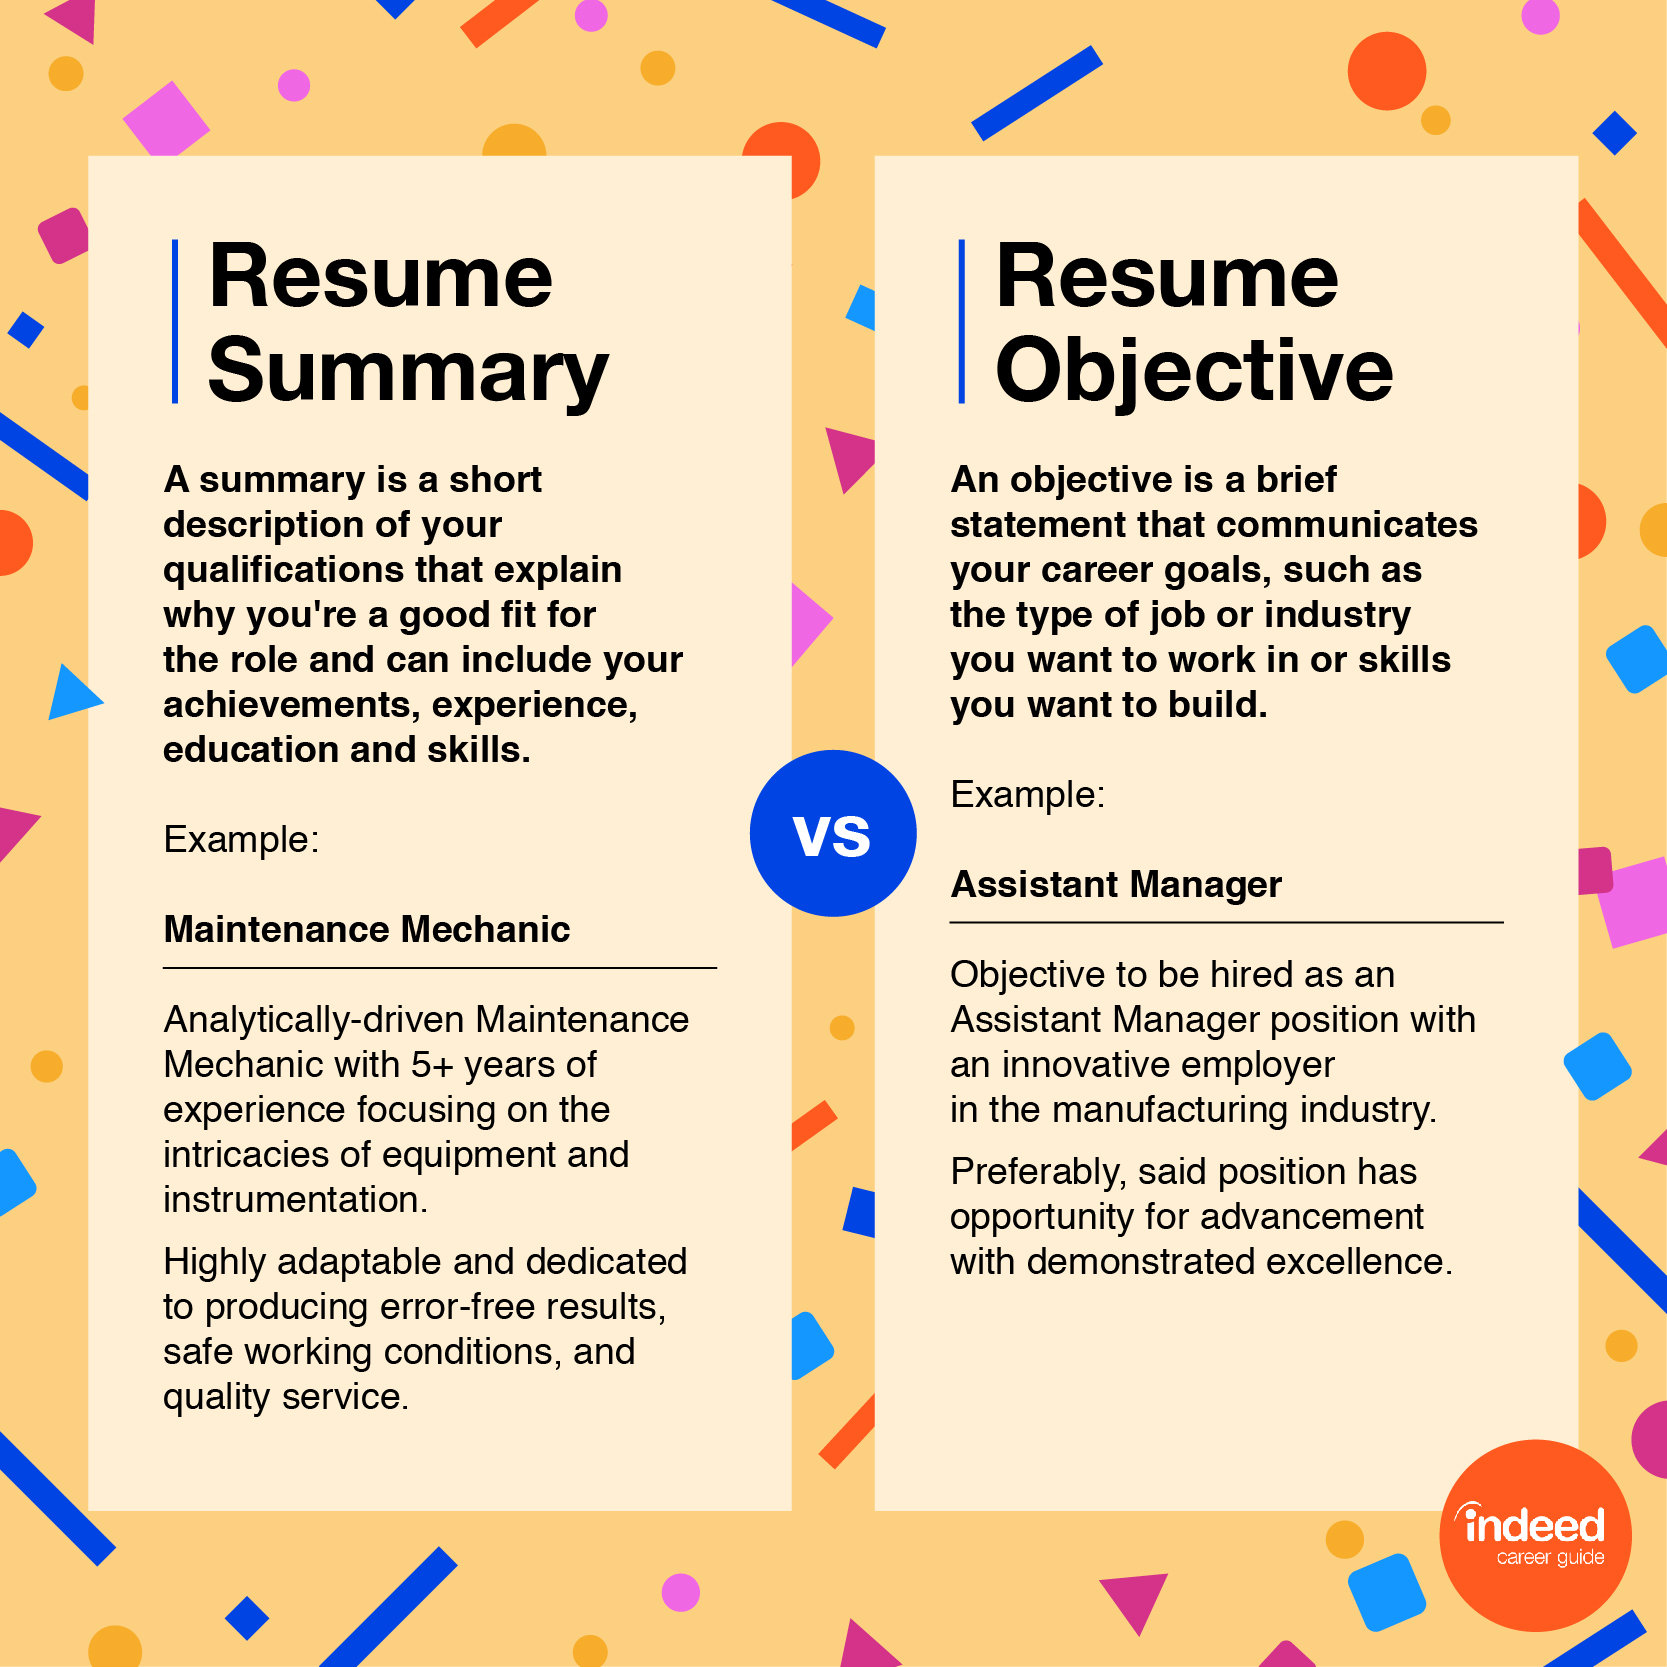 leje ophavsret pude How To Write an Effective Resume Summary (With Examples) | Indeed.com